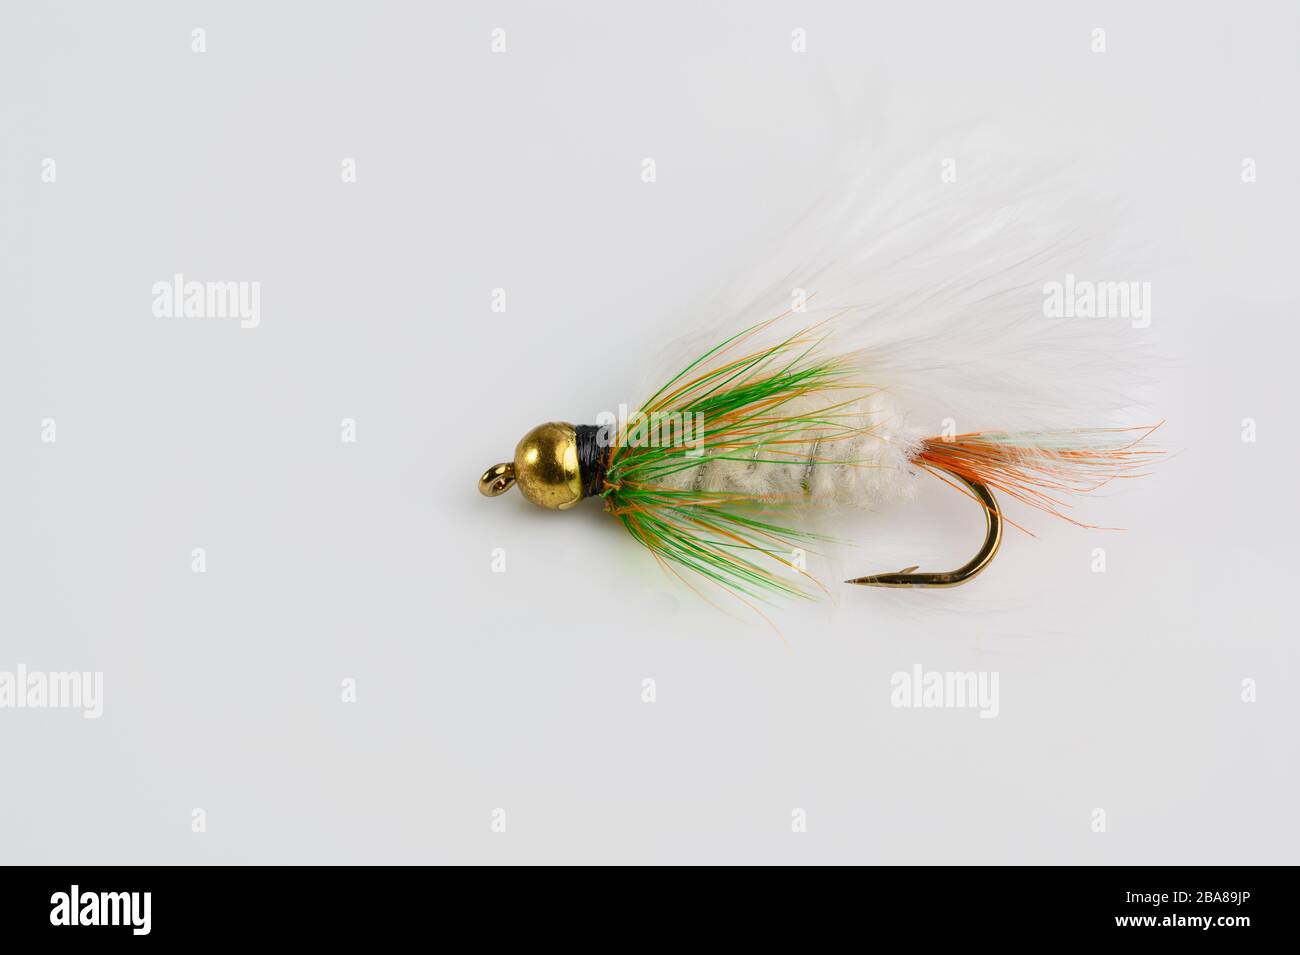 fly fishing fly lure called an appetiser for catching trout Stock Photo -  Alamy